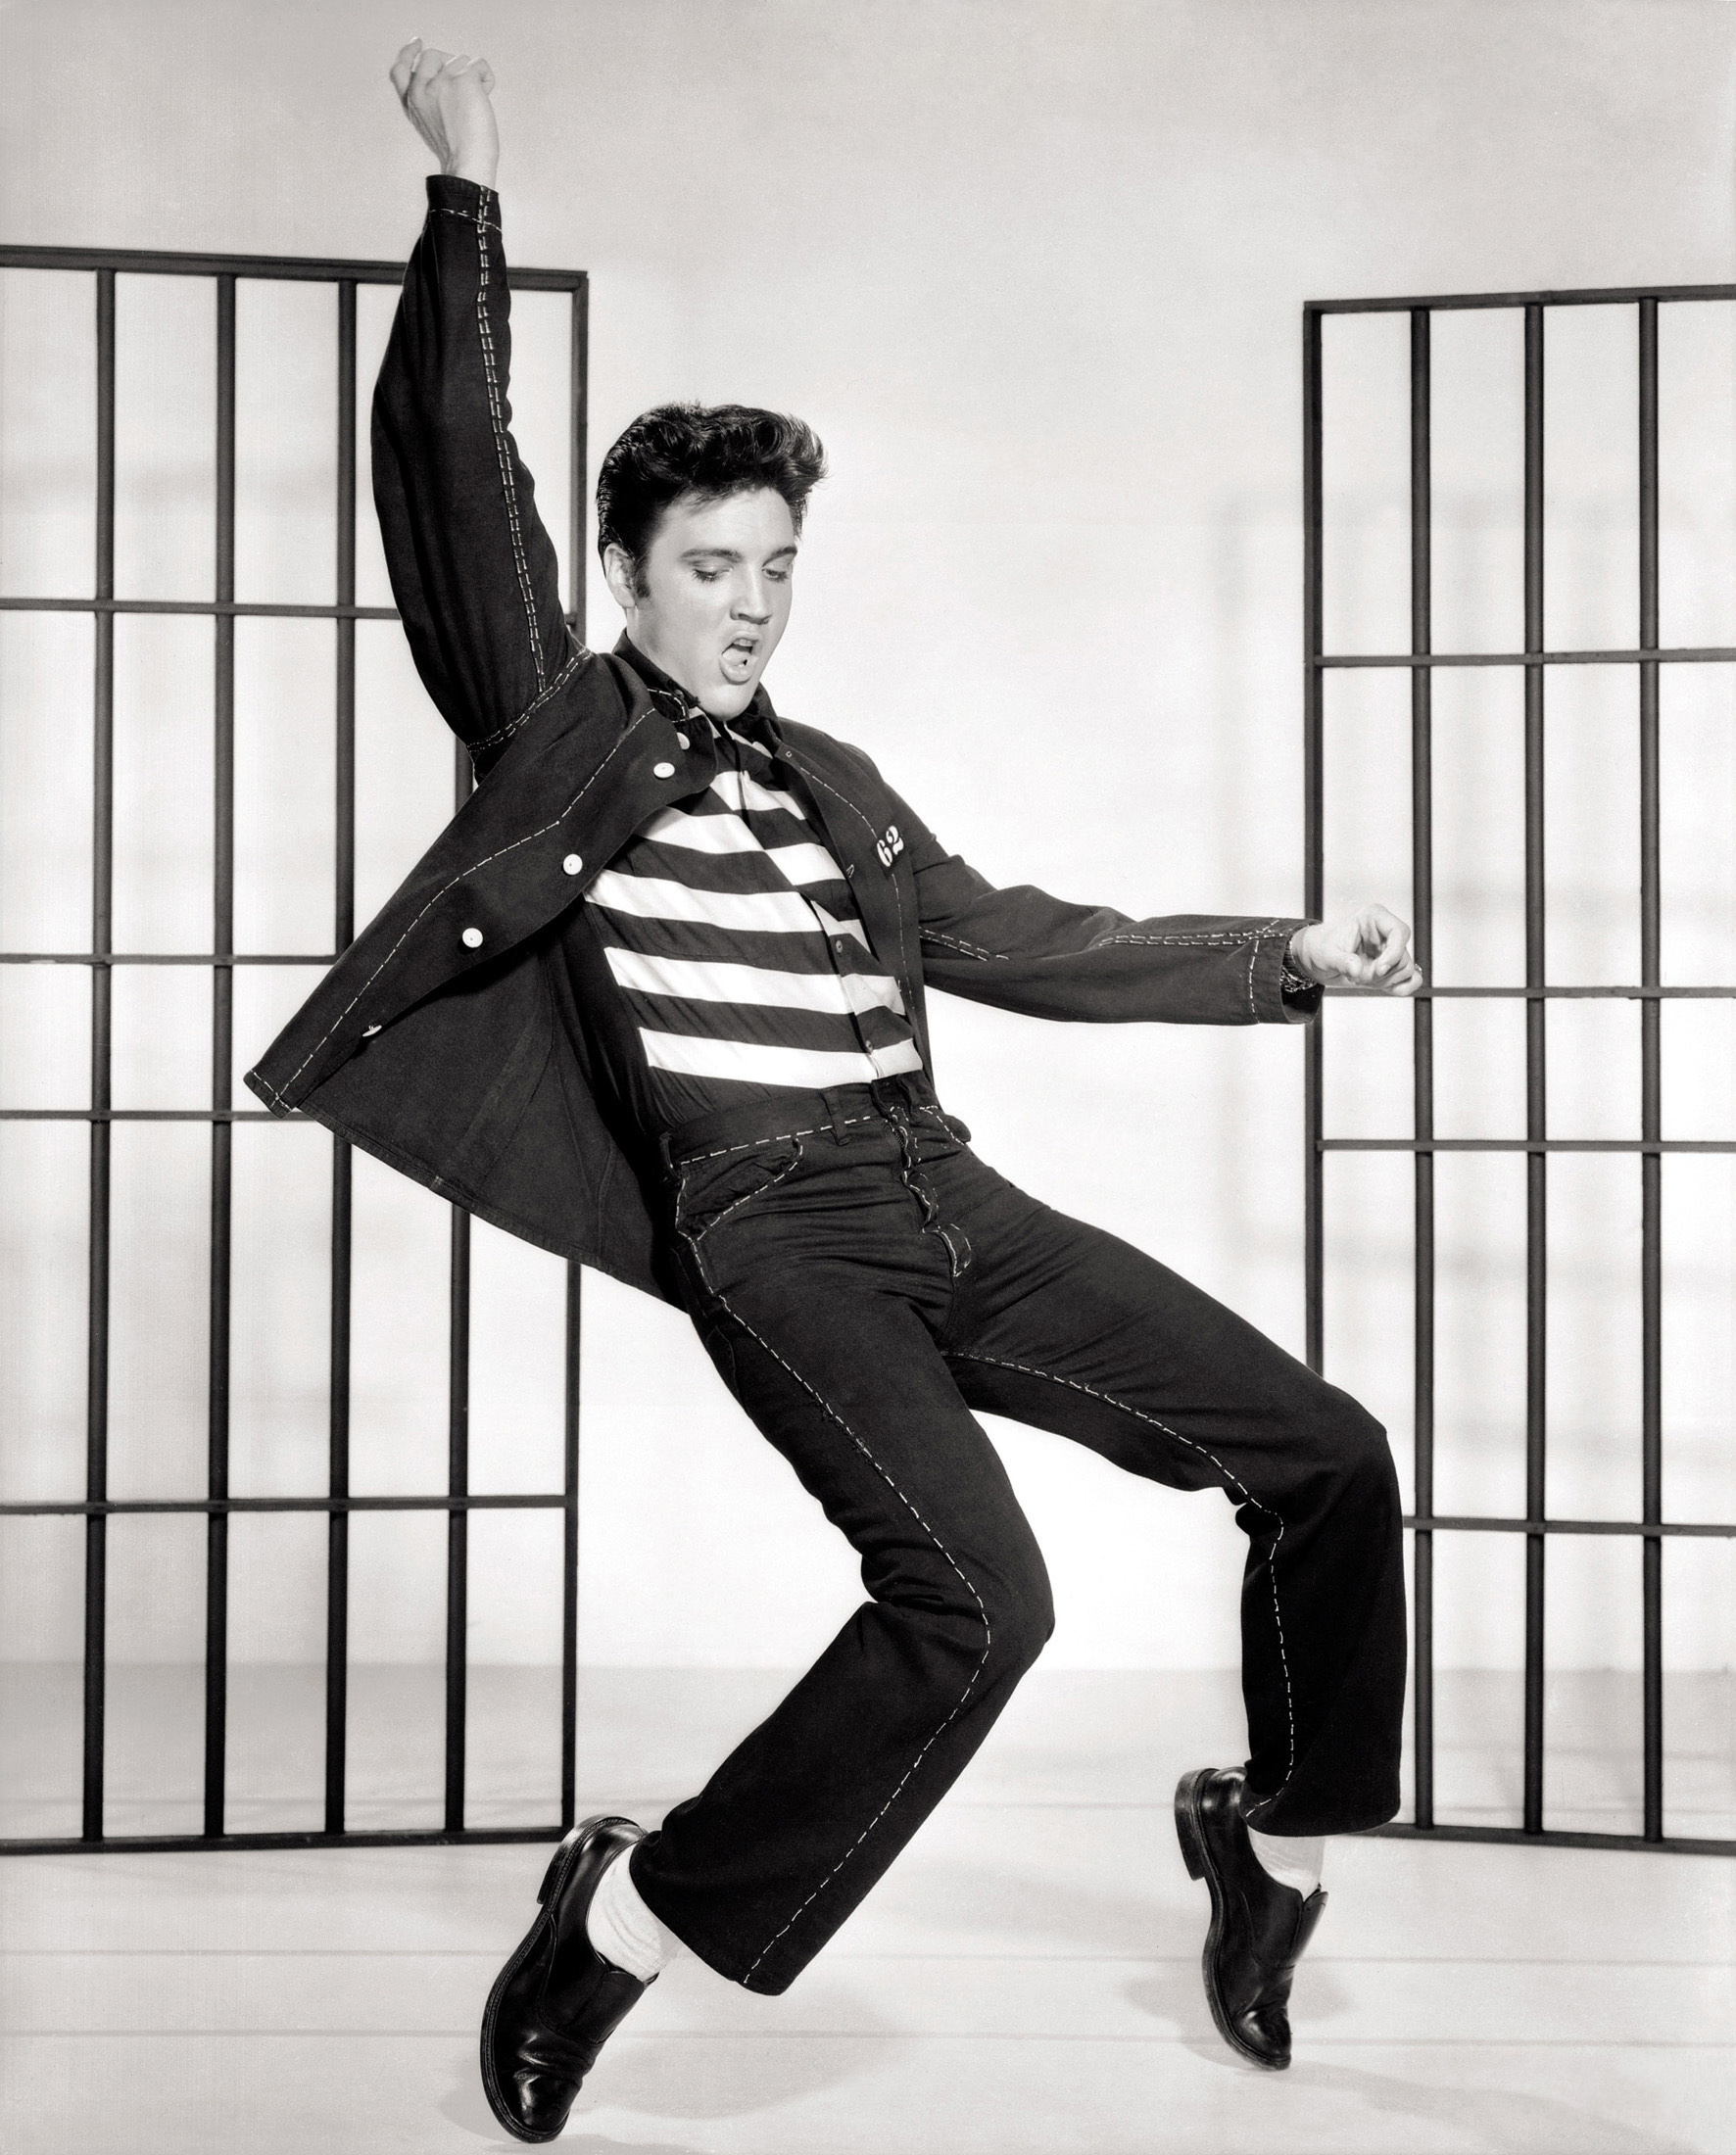 Elvis recorded more than 600 songs, he didn't write a single one.